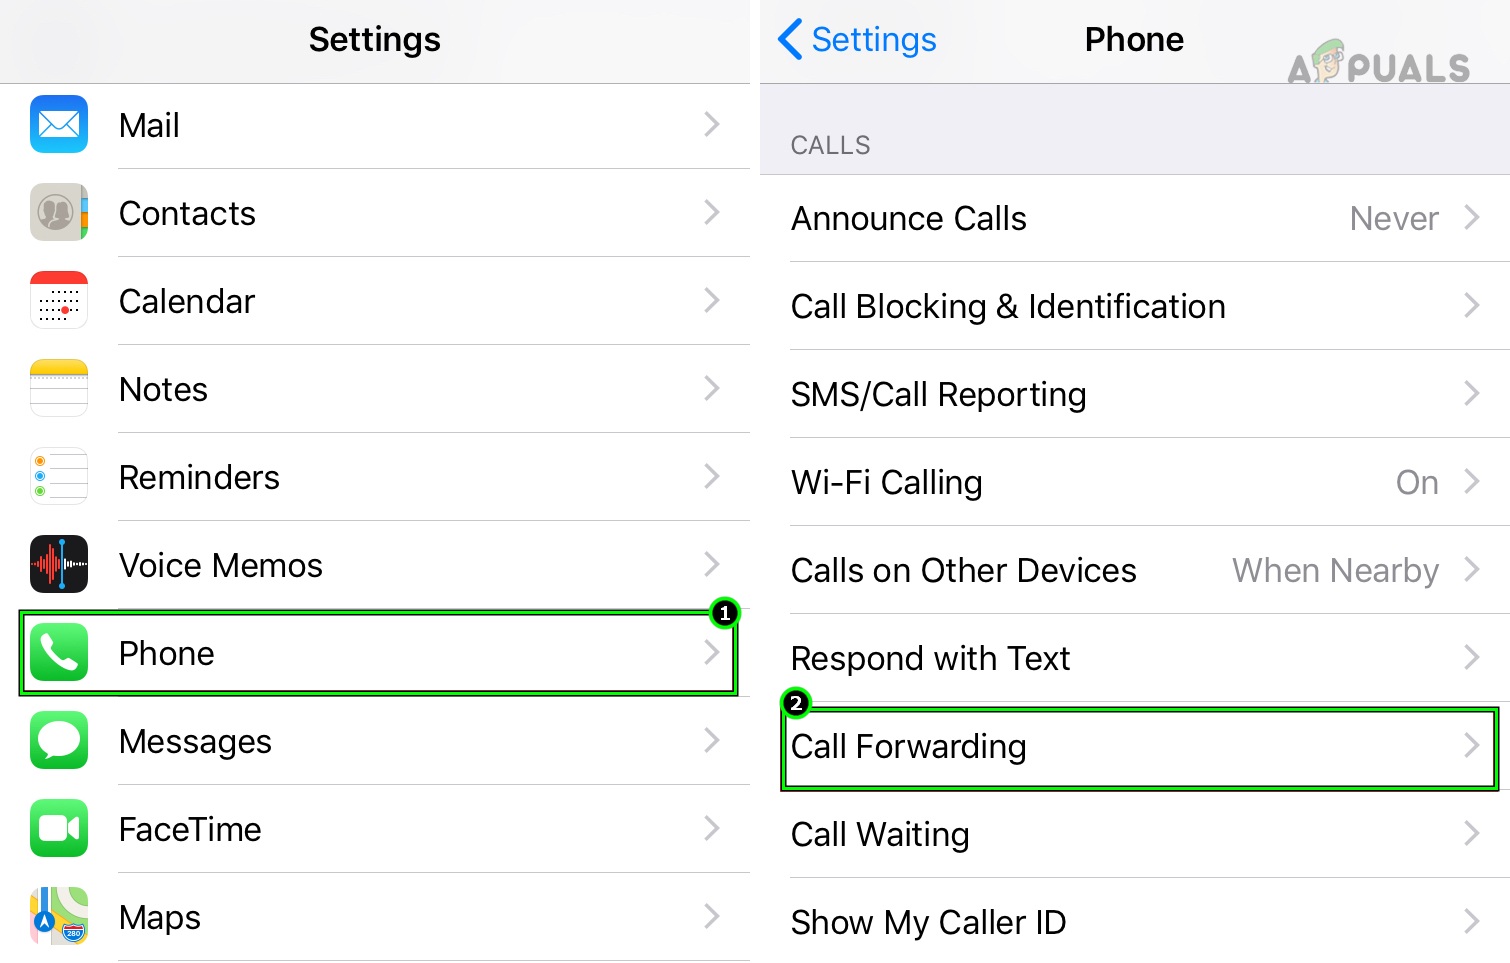 Open the iPhone's Call Forwarding Settings